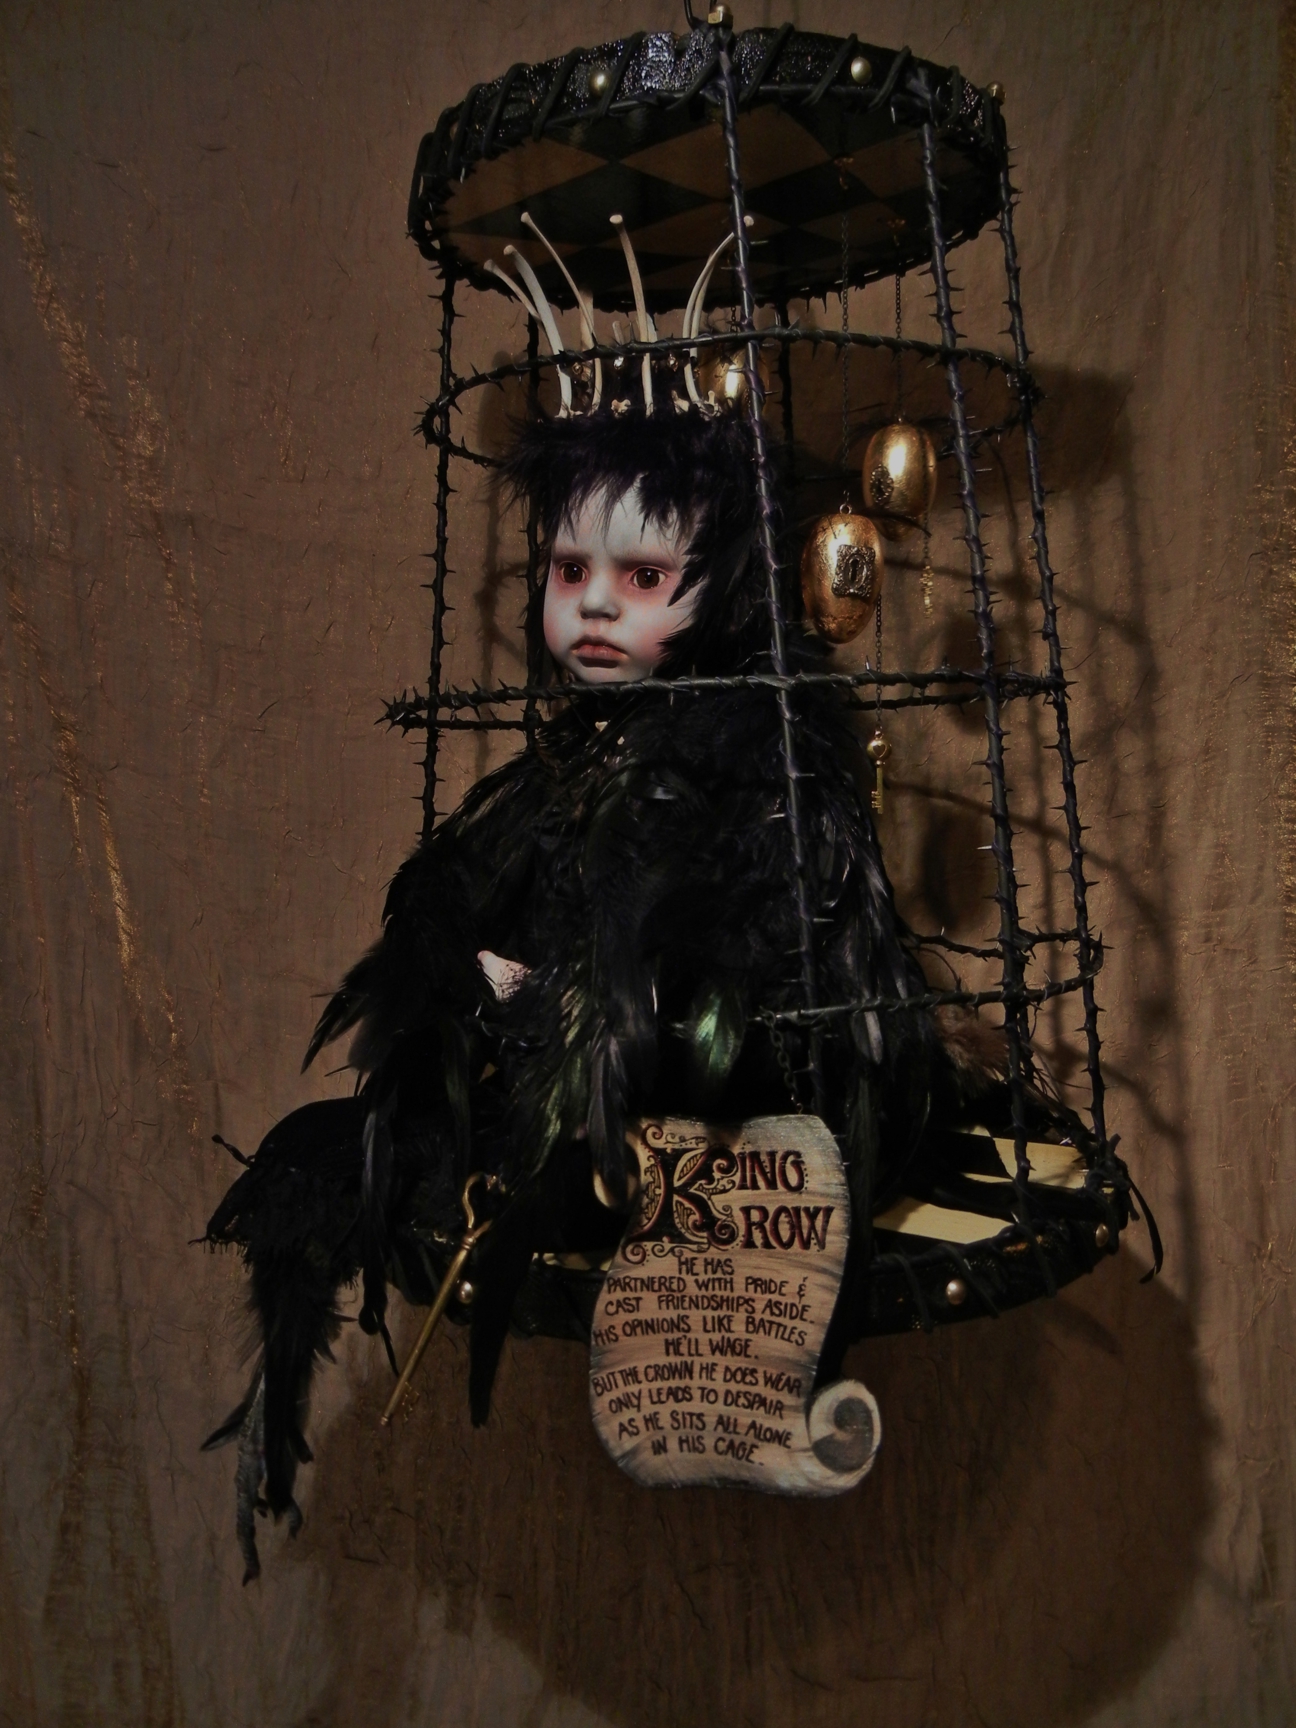 taxidermy artdoll assemblage of a hapless crowned black-feathered crow doll sitting forlornly in a cage